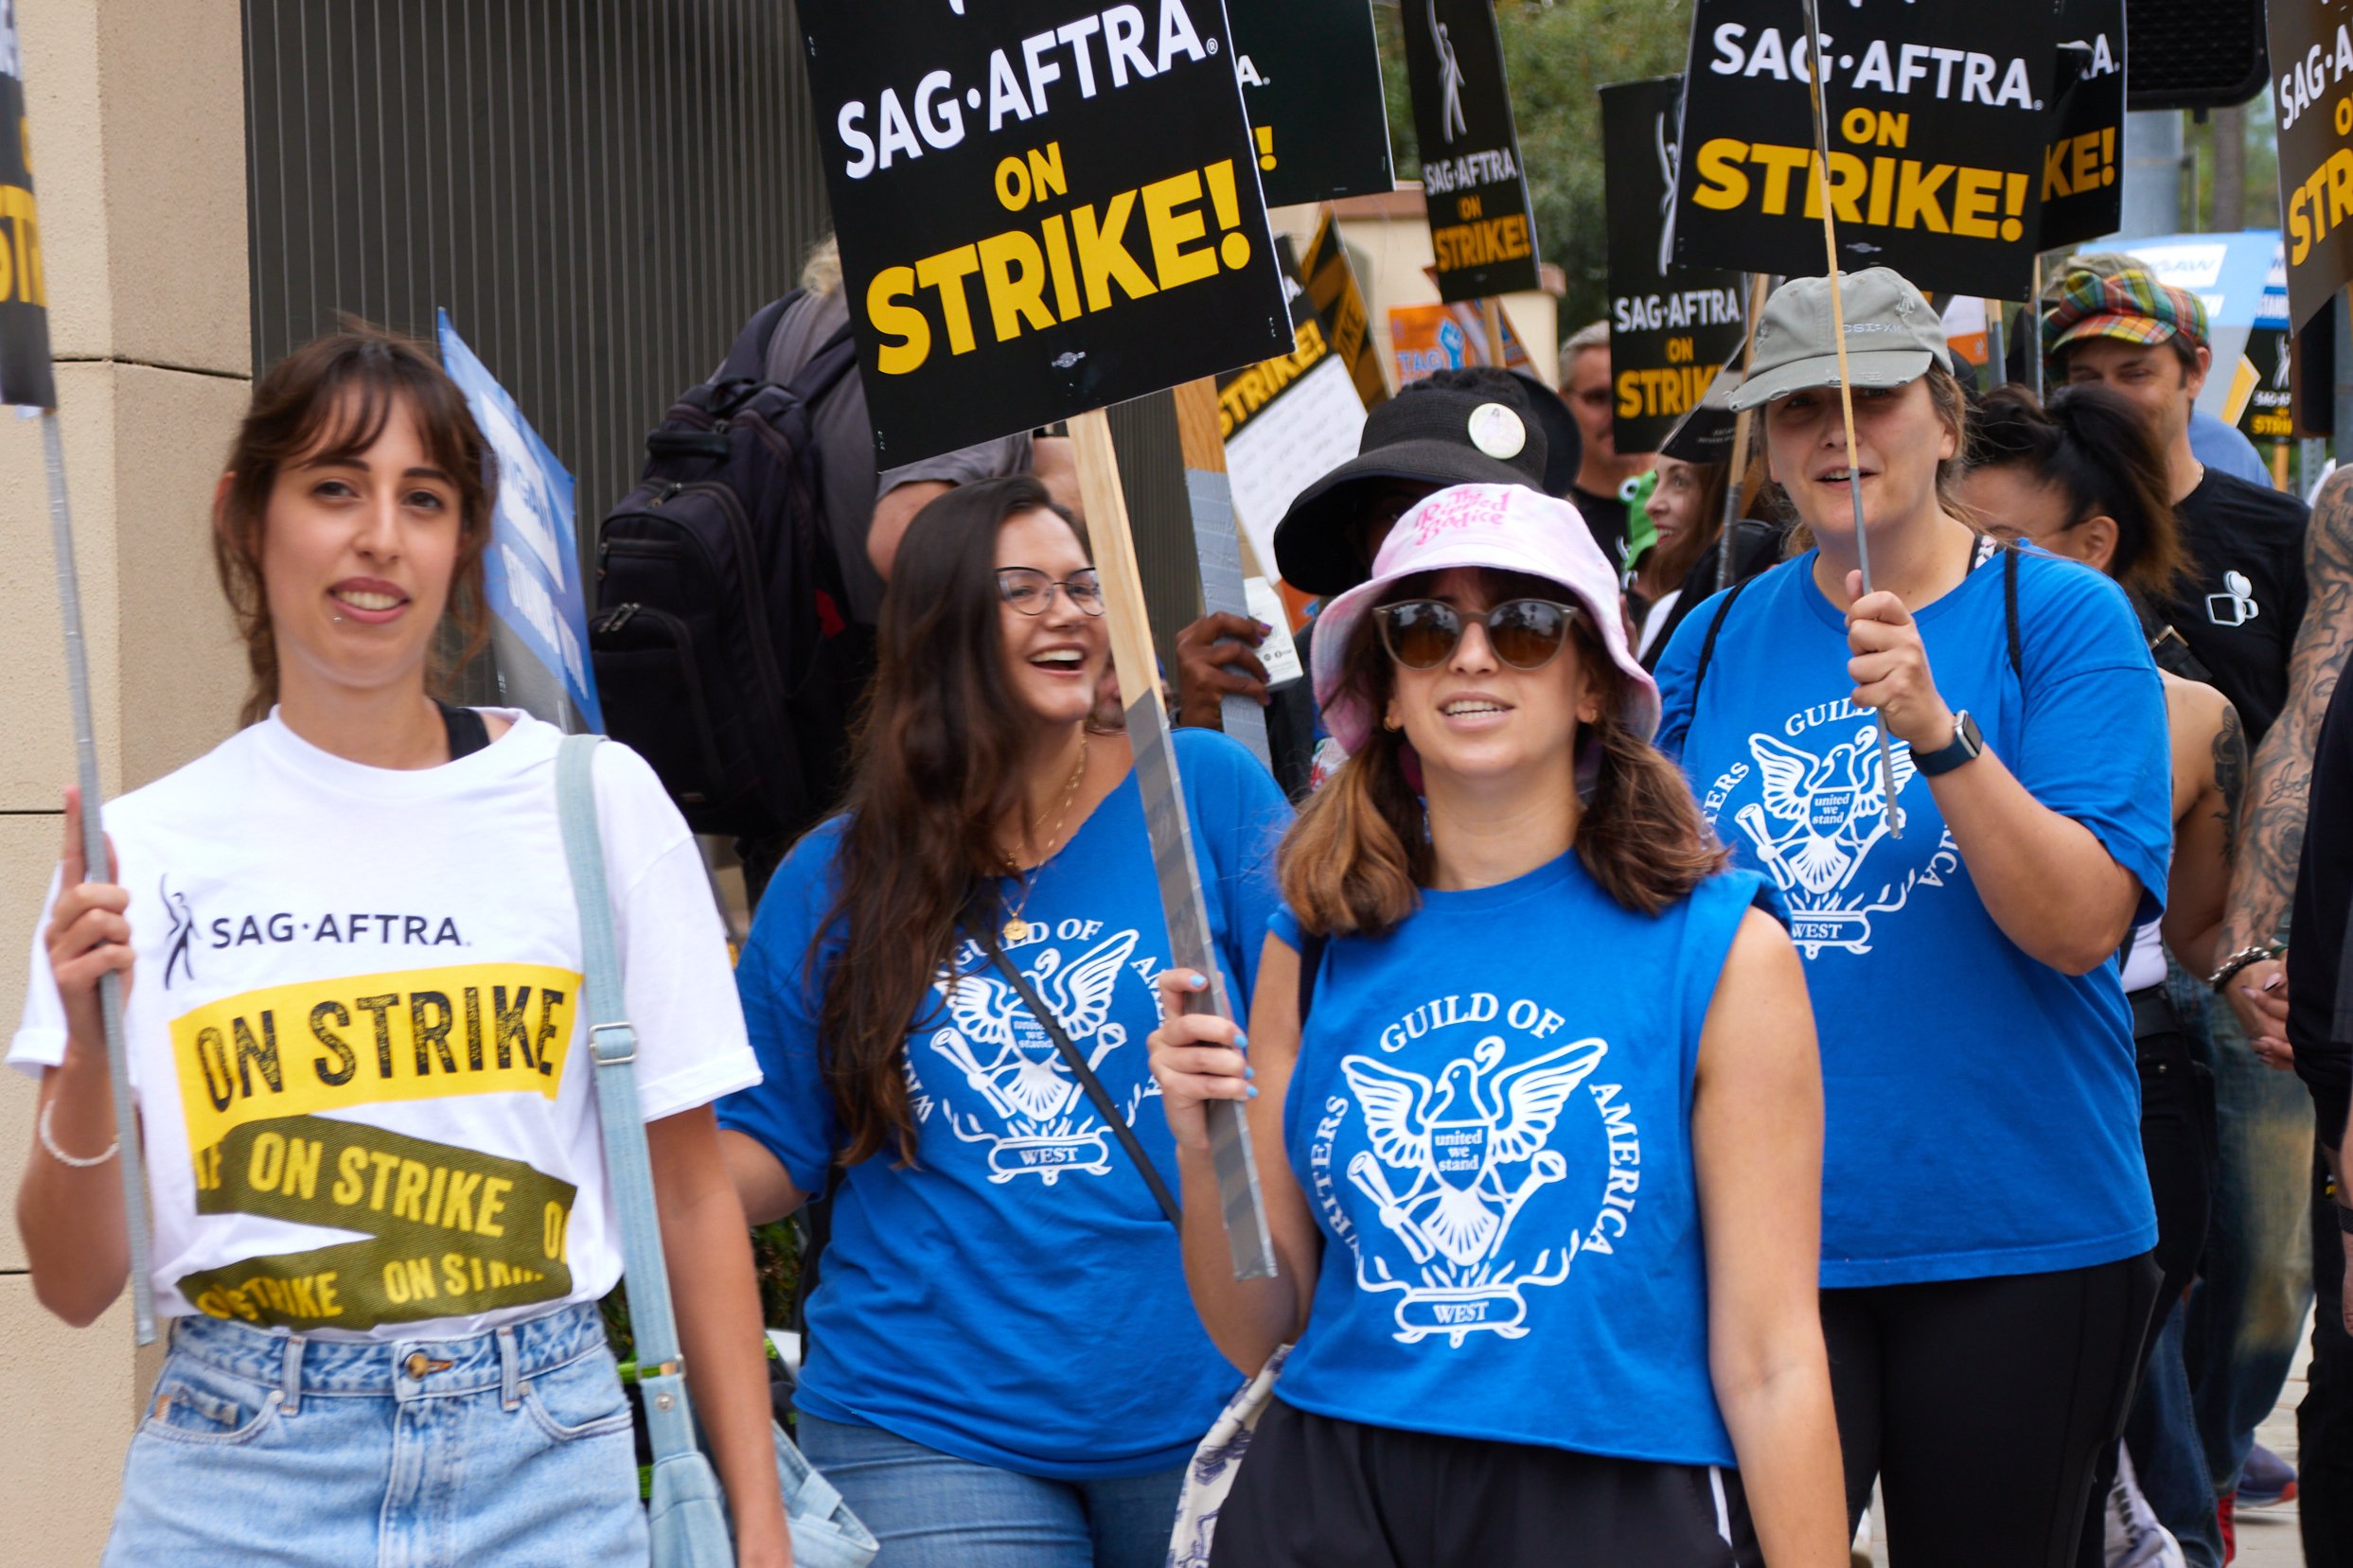  Writers from Writers Guild of America (WGA) marches alongside SAG-AFTRA members in solidarity in front of the Warner Bros. Studio, Burbank, Calif., on Sept 29, 2023. While WGA had struck a deal with the studios already earlier in the week, its membe